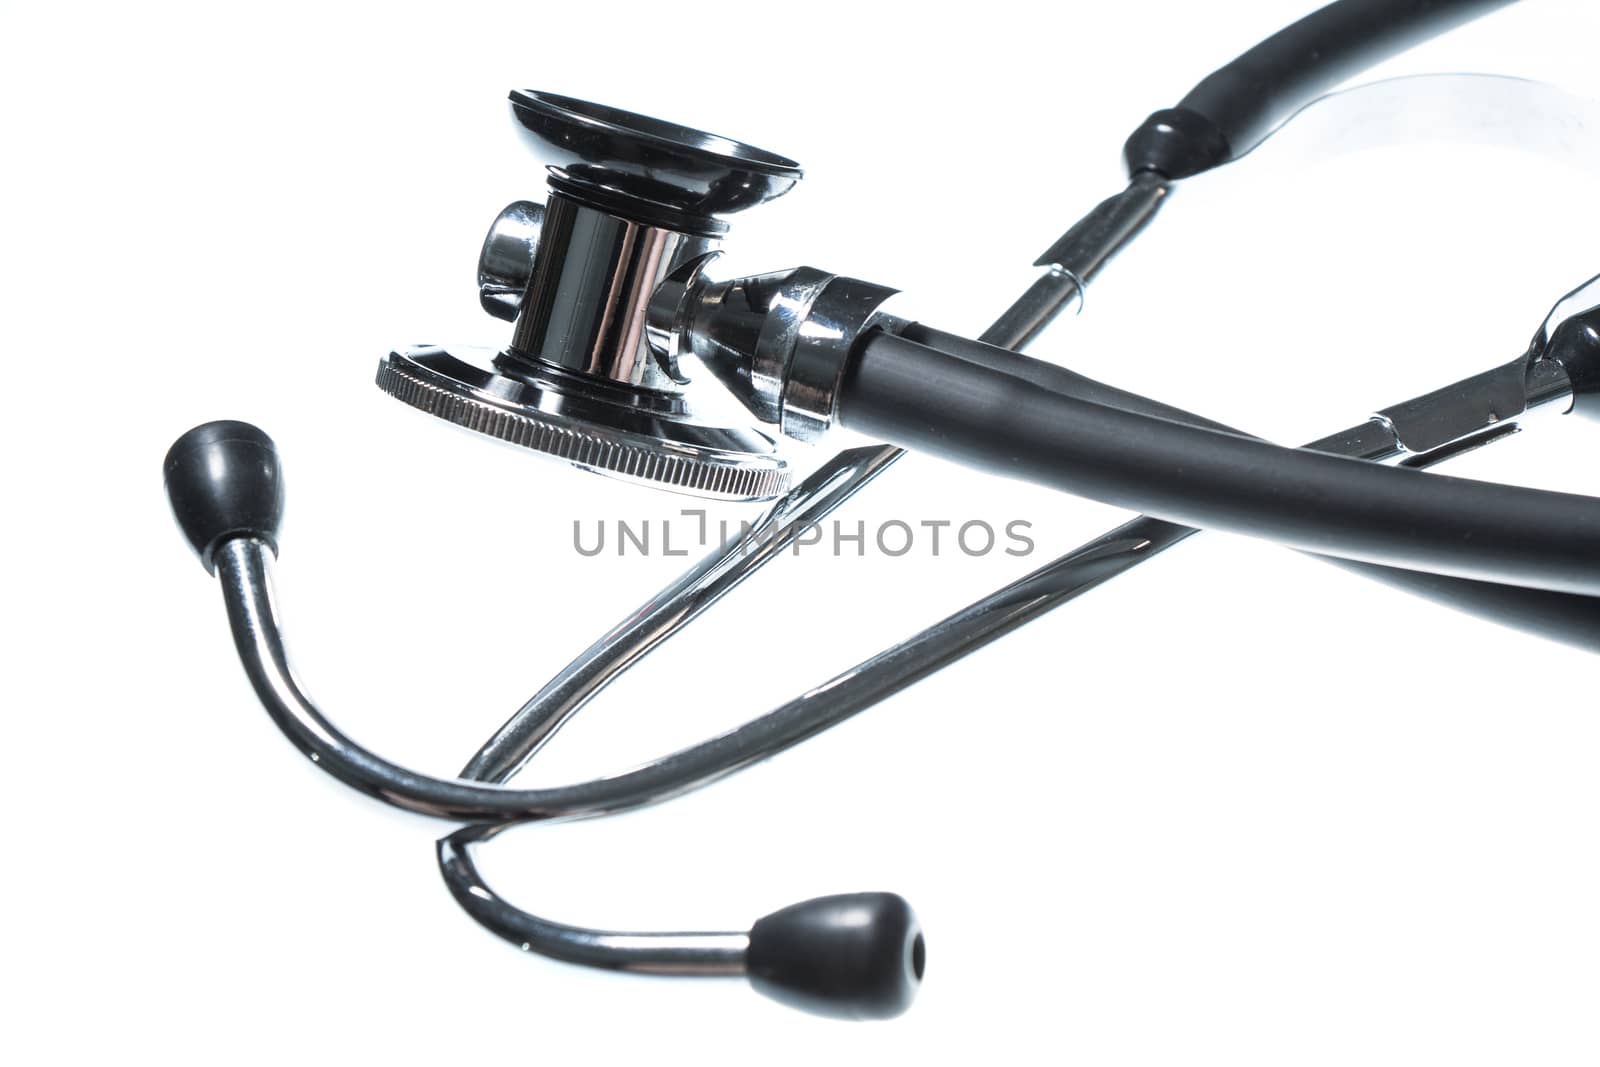 Stethoscope, close-up isolated by fotoquique